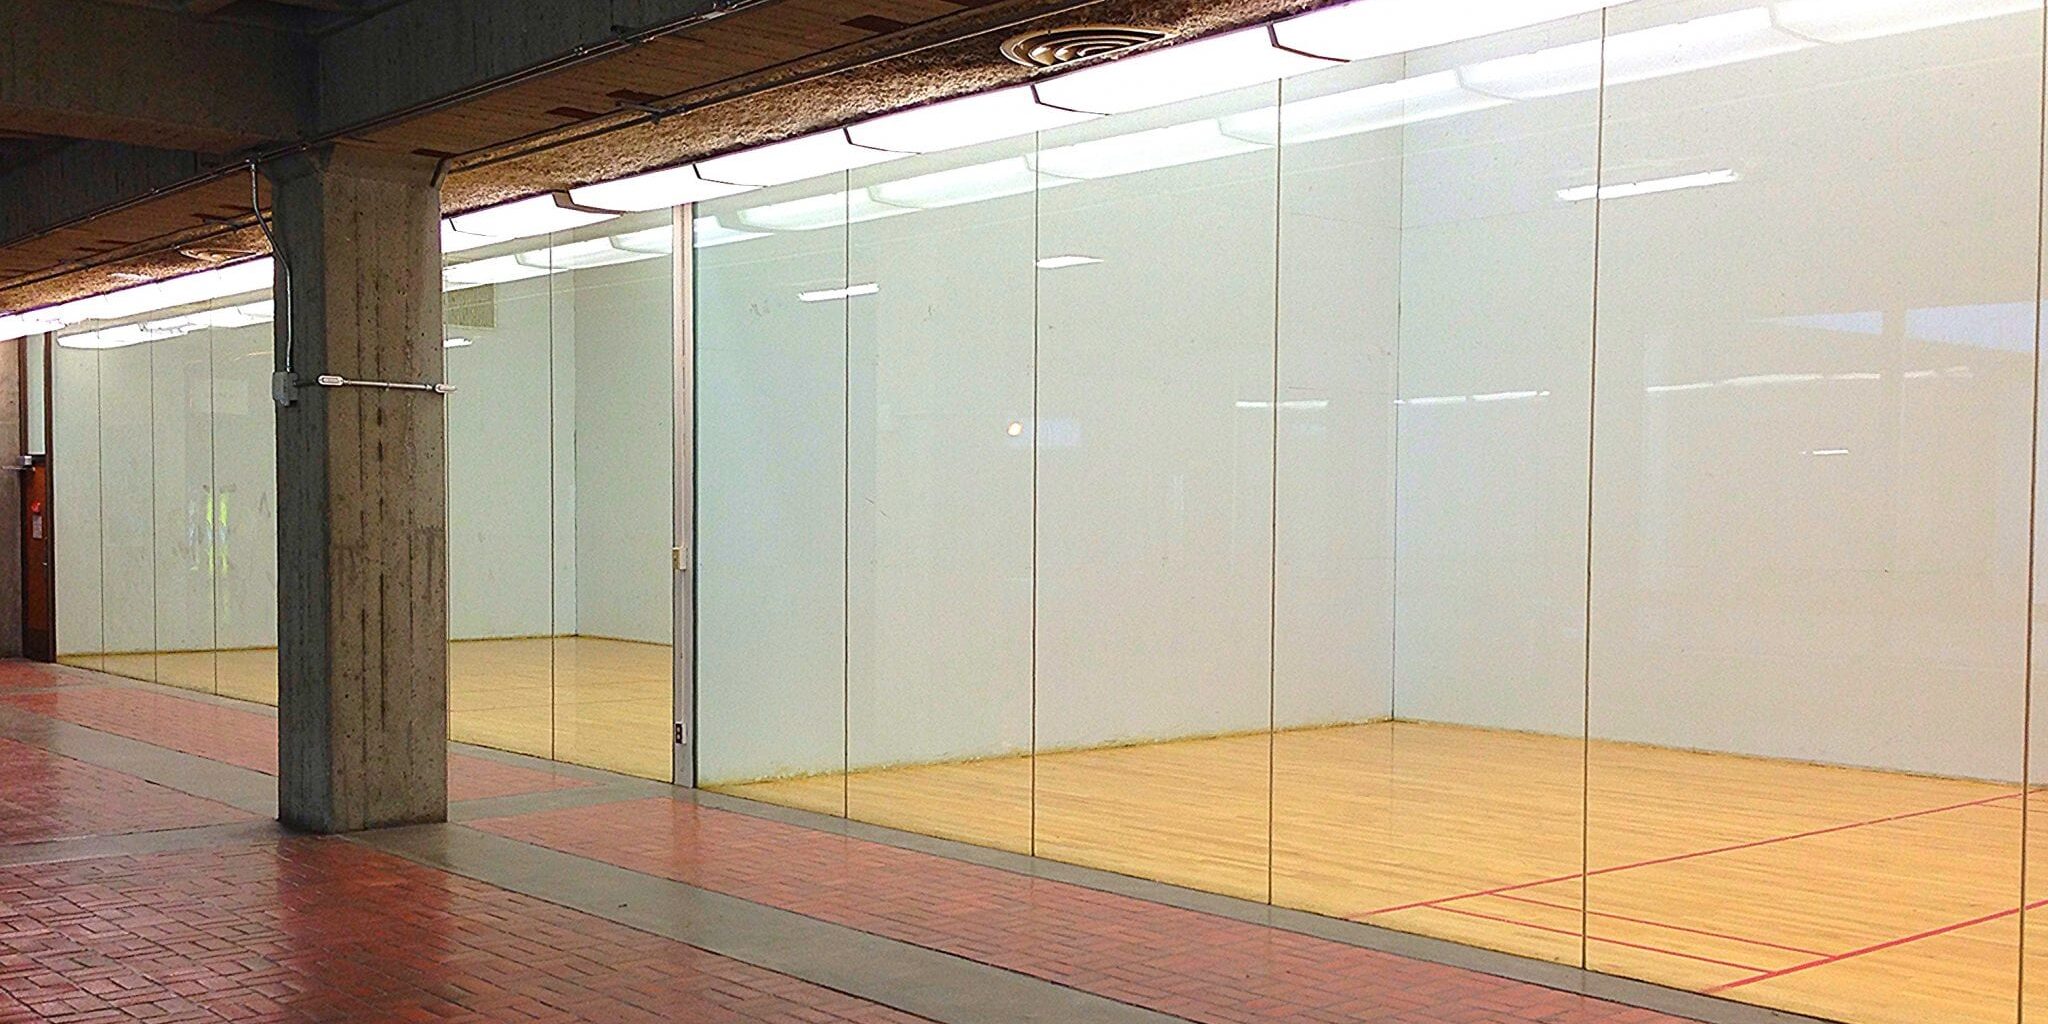 the racquetball courts